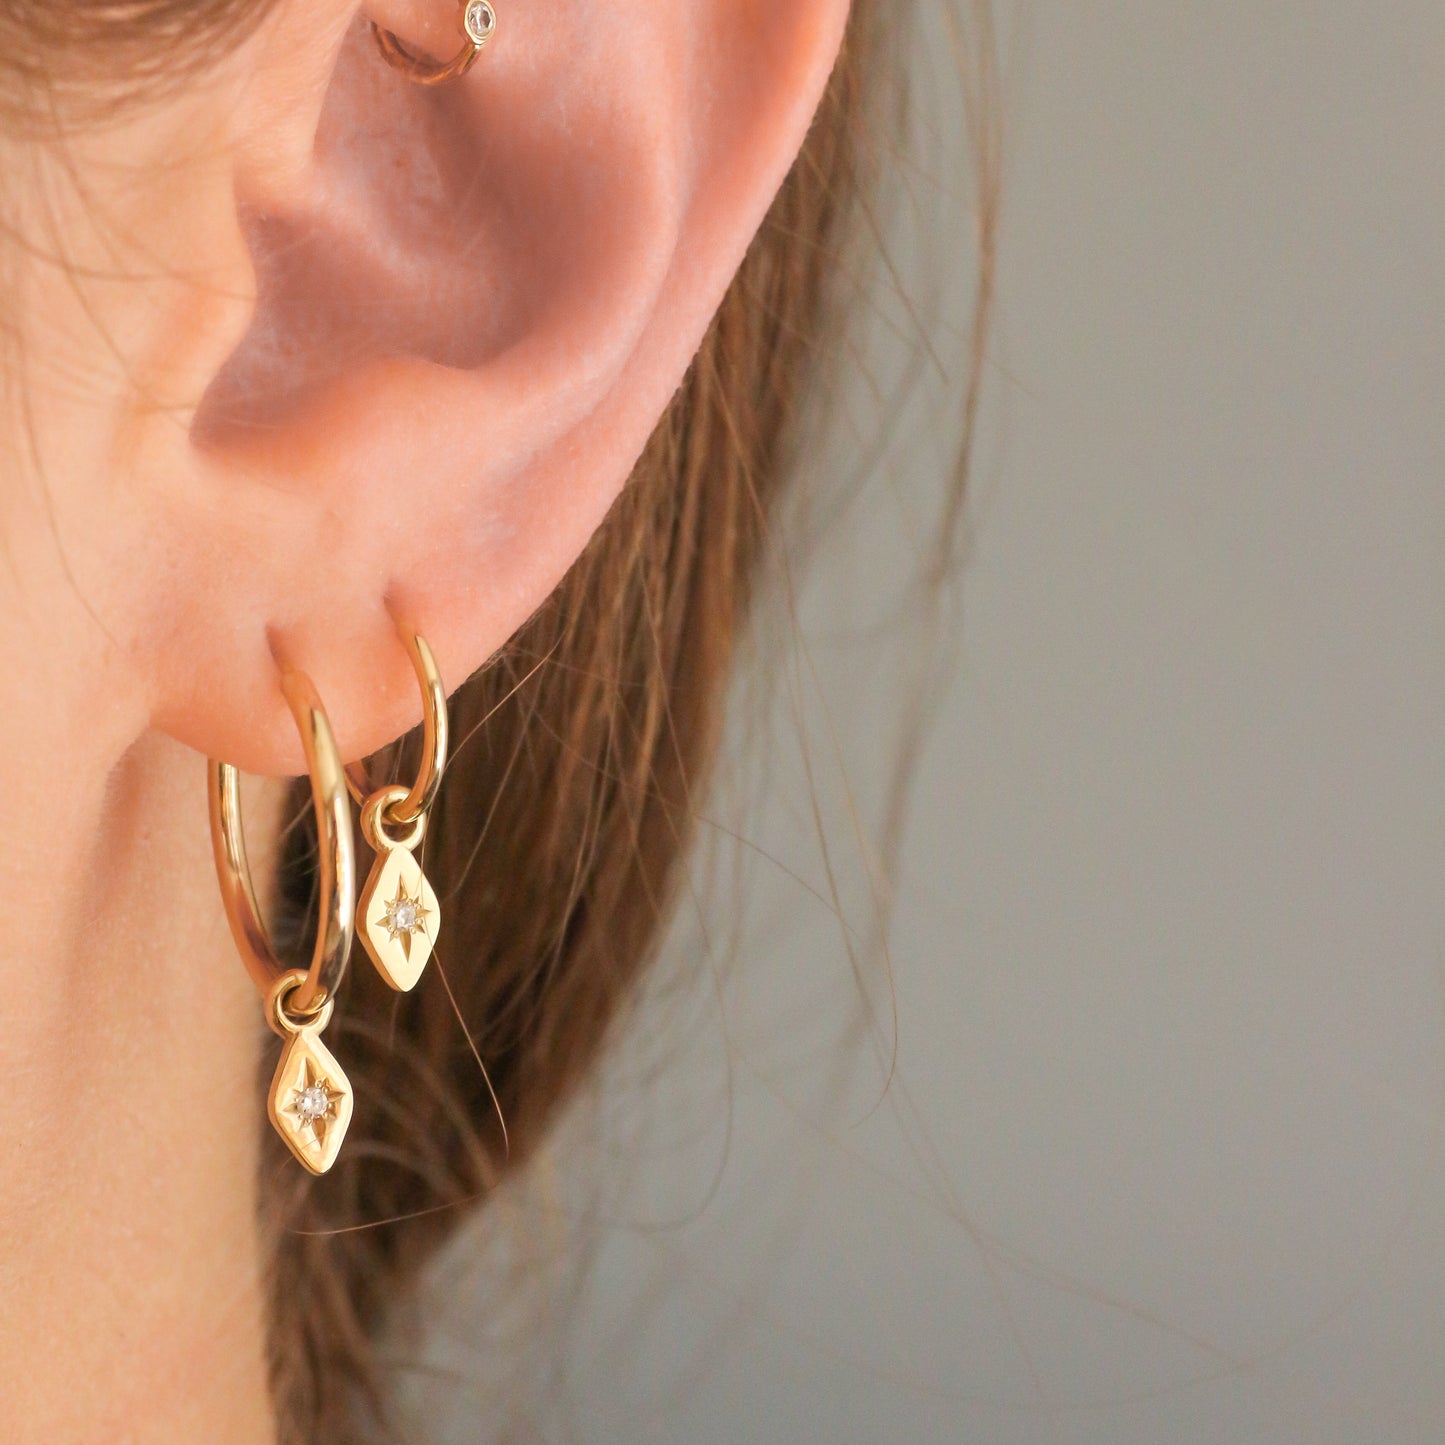 Marquise hoops 14k gold